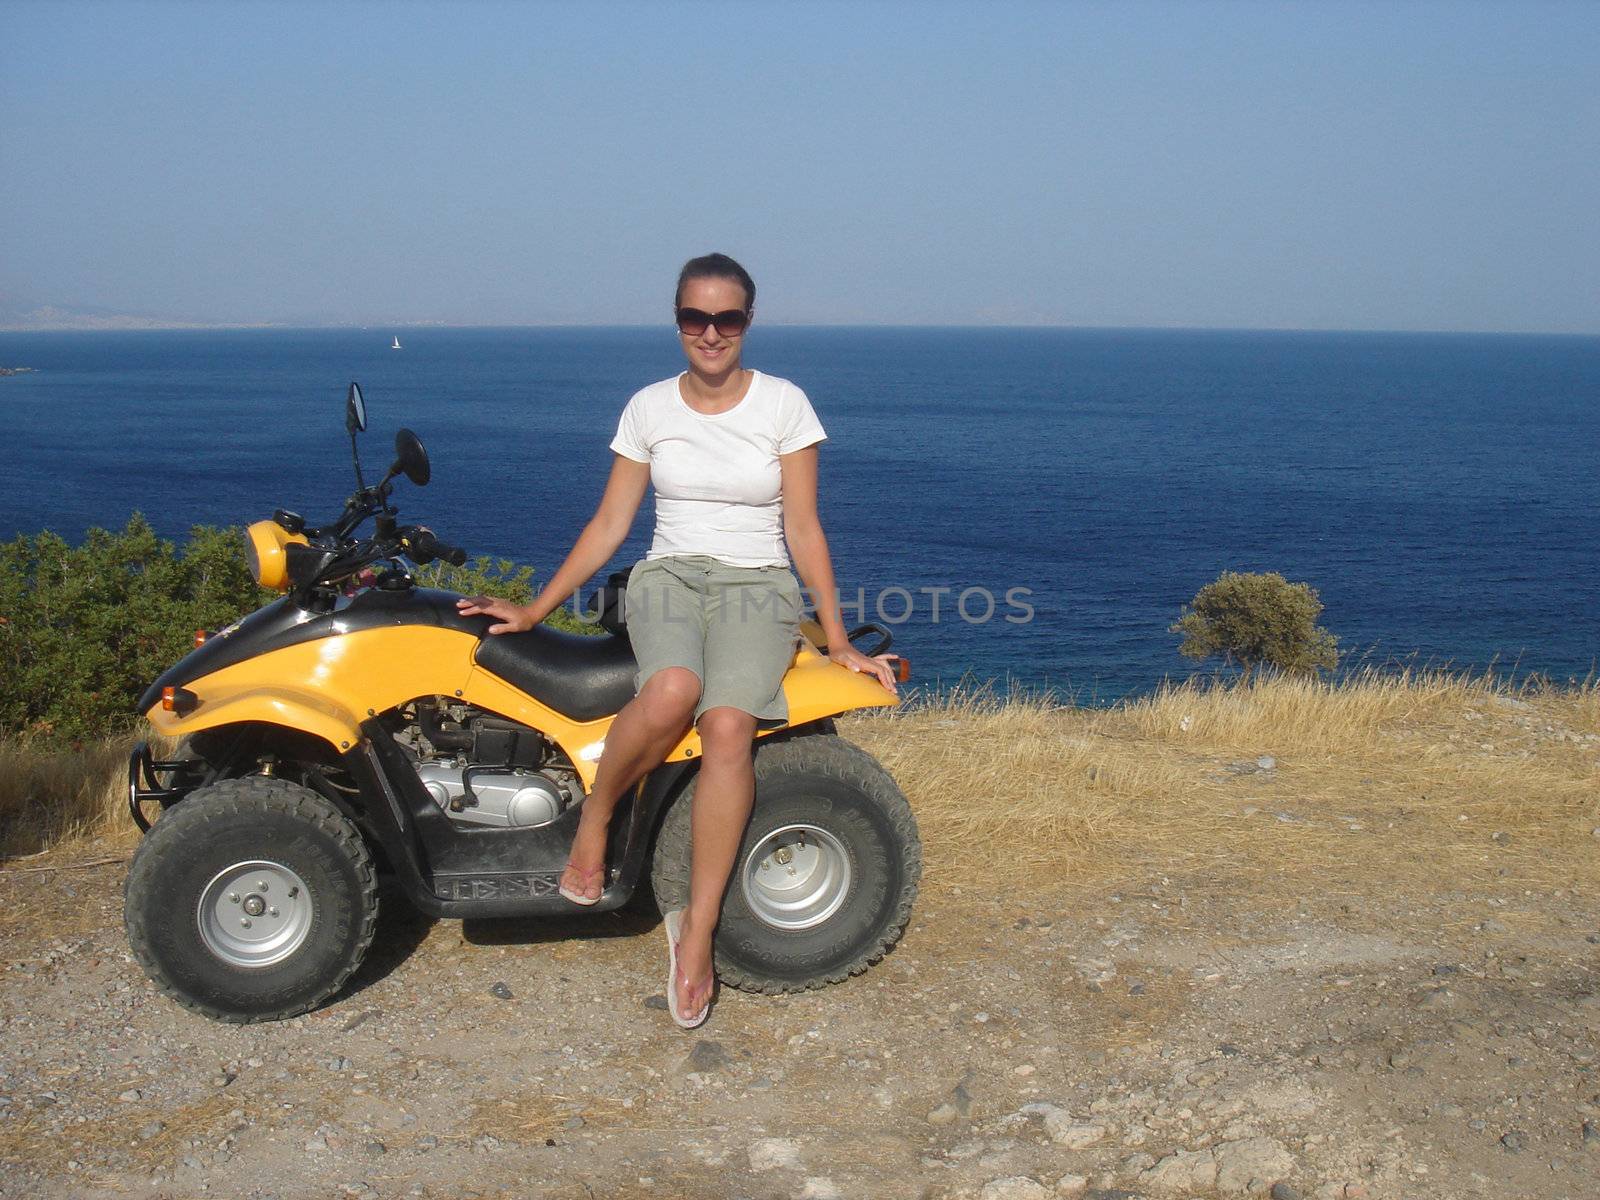 Pretty girl on quadricycle near the sea by mulden